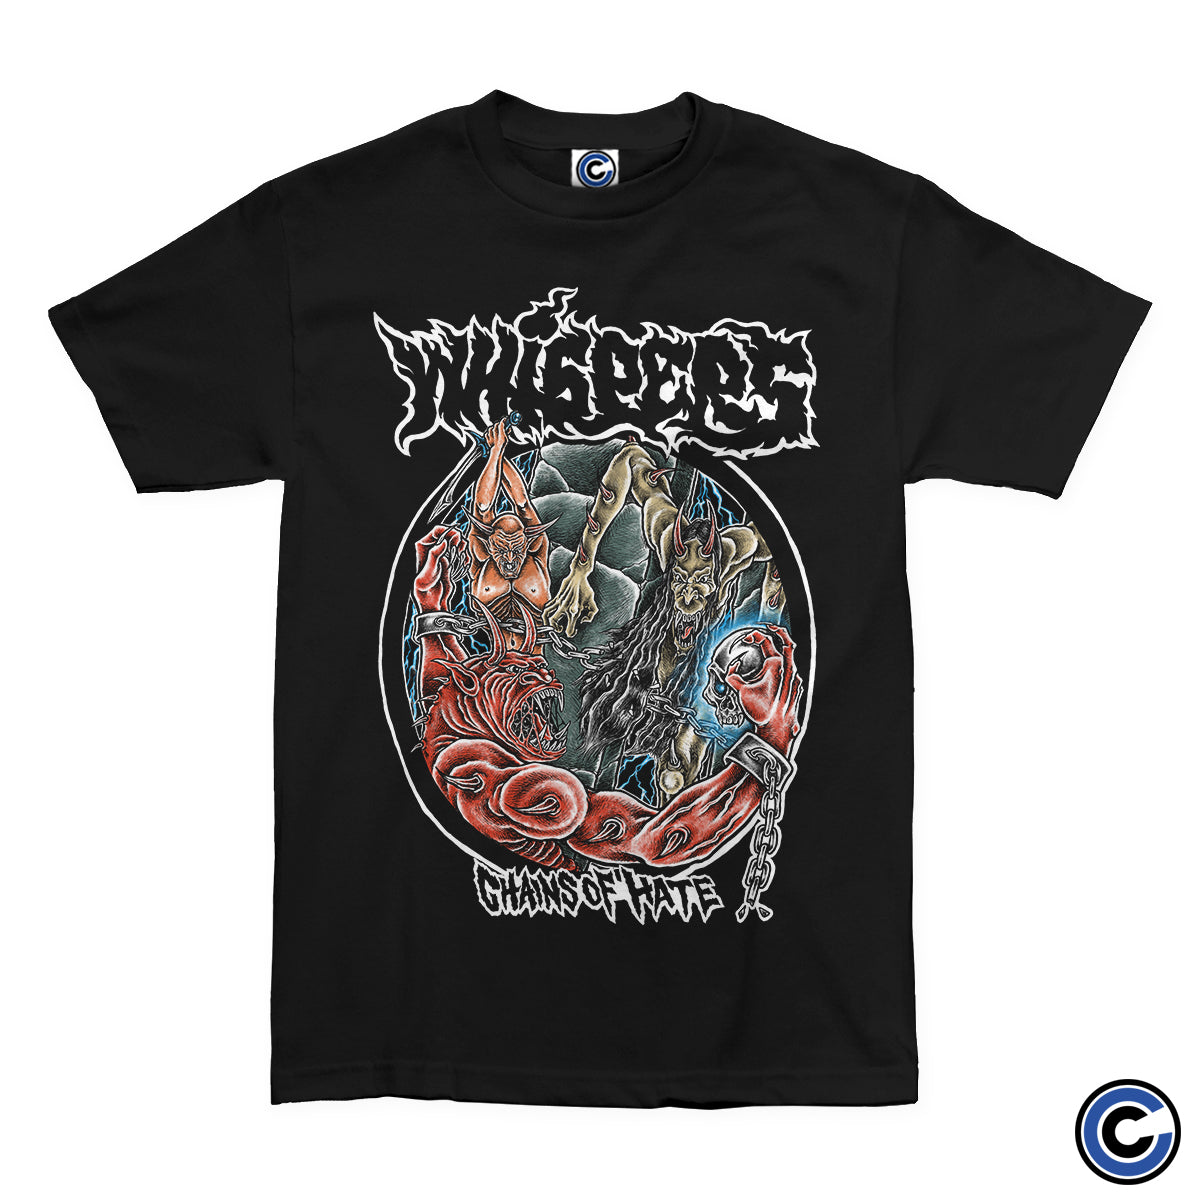 Whispers "Chains Of Hate" Shirt